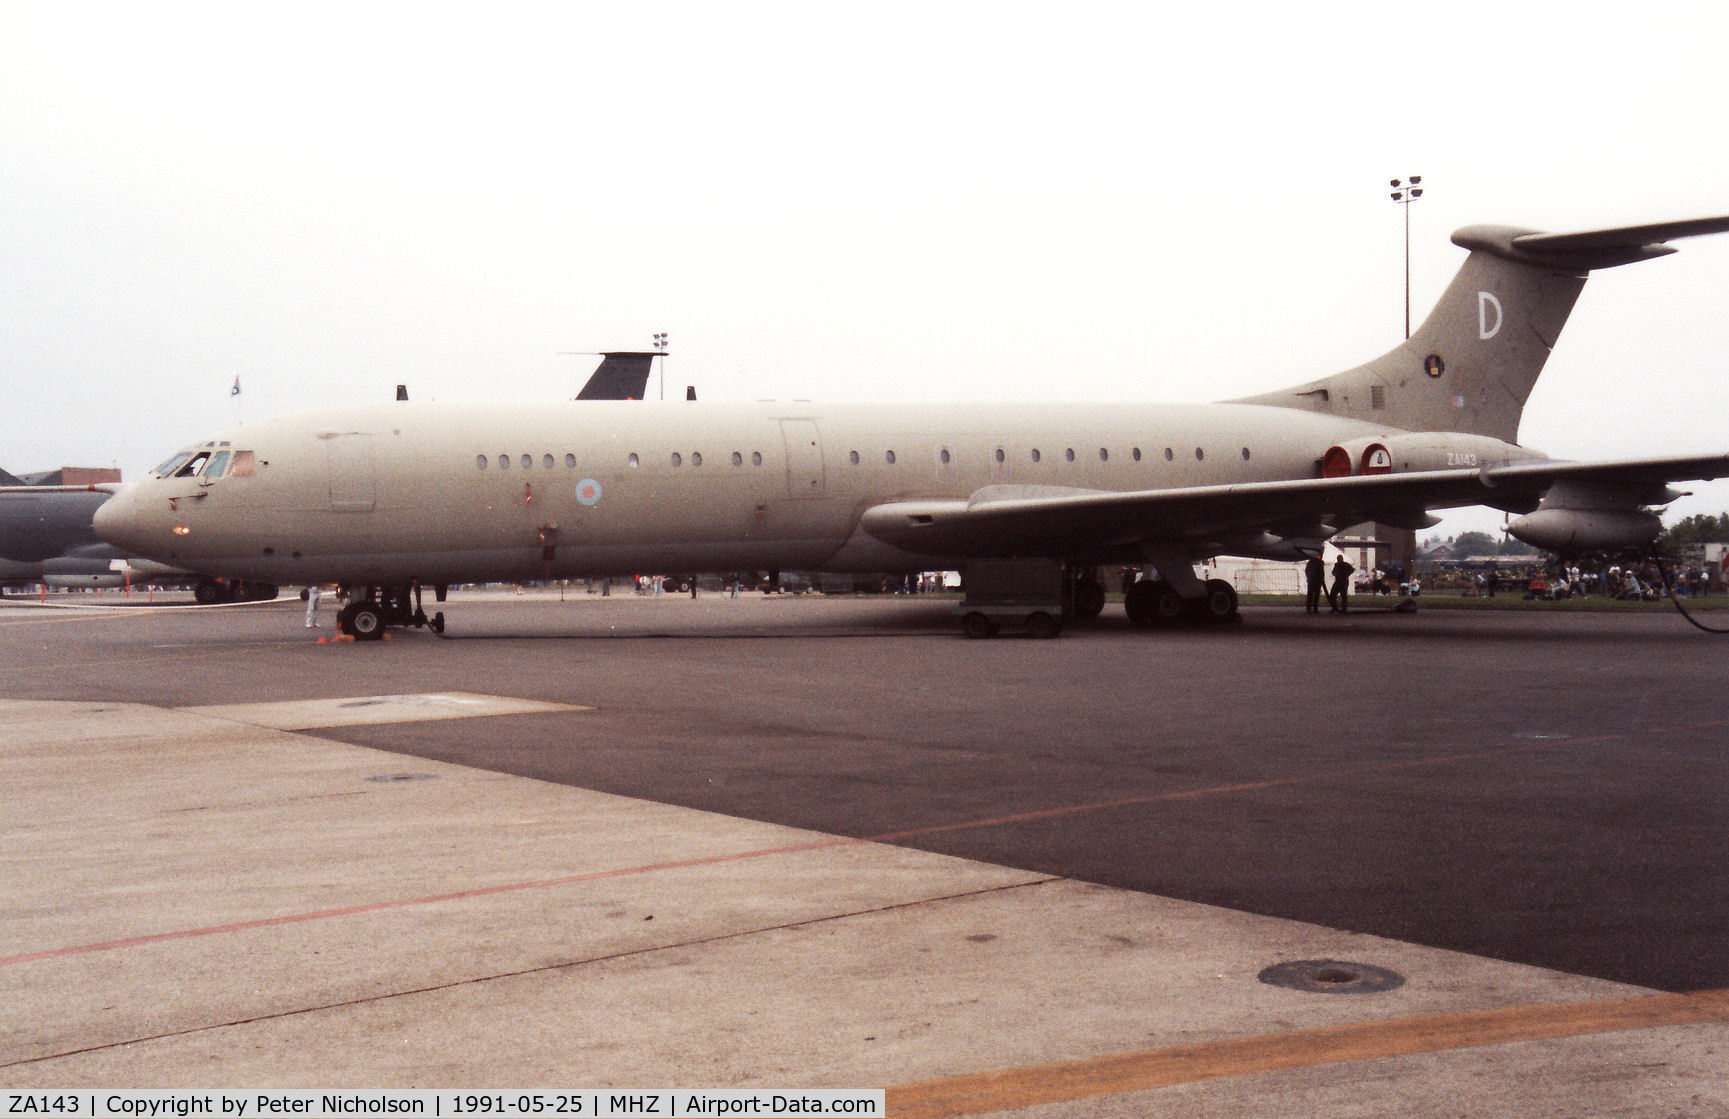 ZA143, Vickers VC10 K.2 C/N 813, VC-10 K.2 named The Empire Strikes Back of 101 Squadron at RAF Brize Norton in Desert Storm markings on display at the 1991 Mildenhall Air Fete.